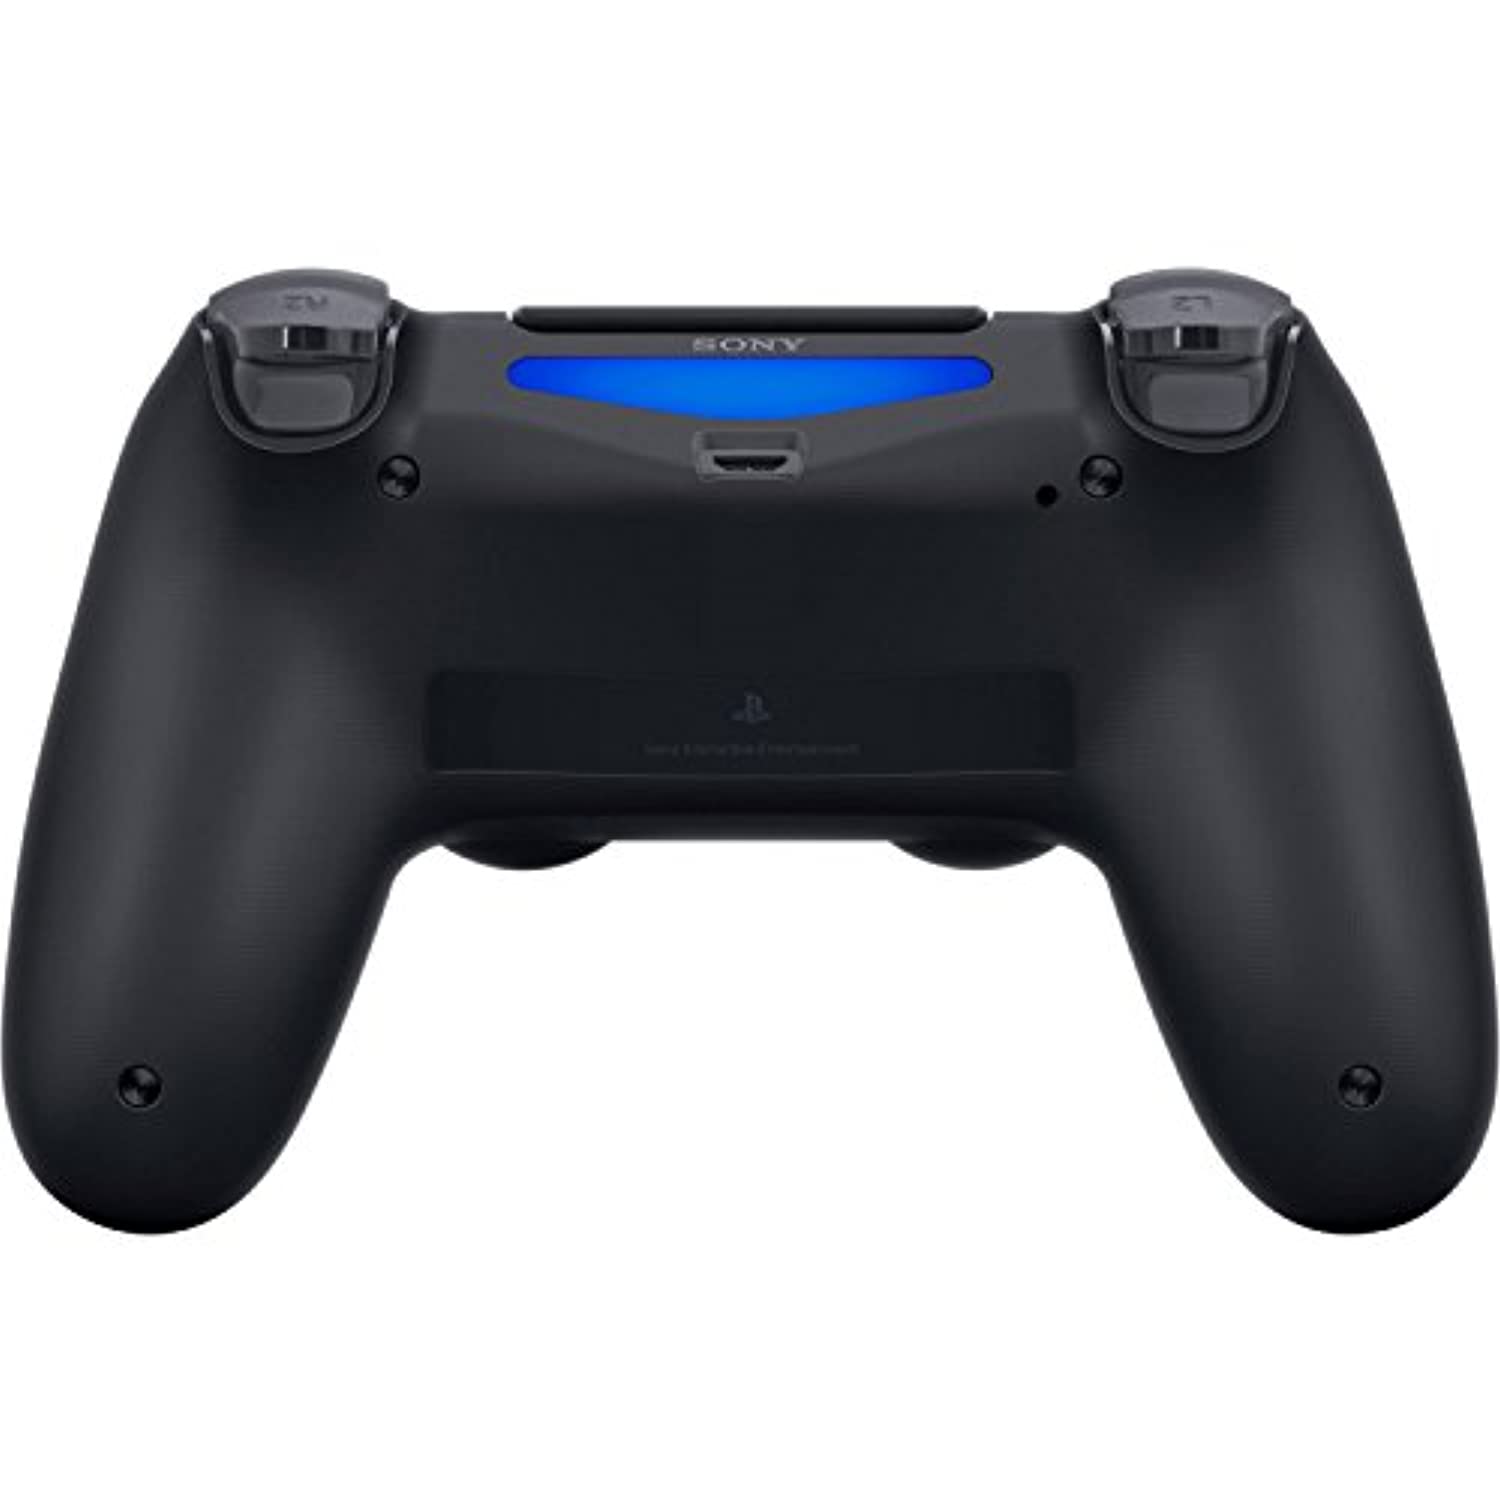 Sony Official PlayStation 4 Dualshock 4 Controller - Version 2